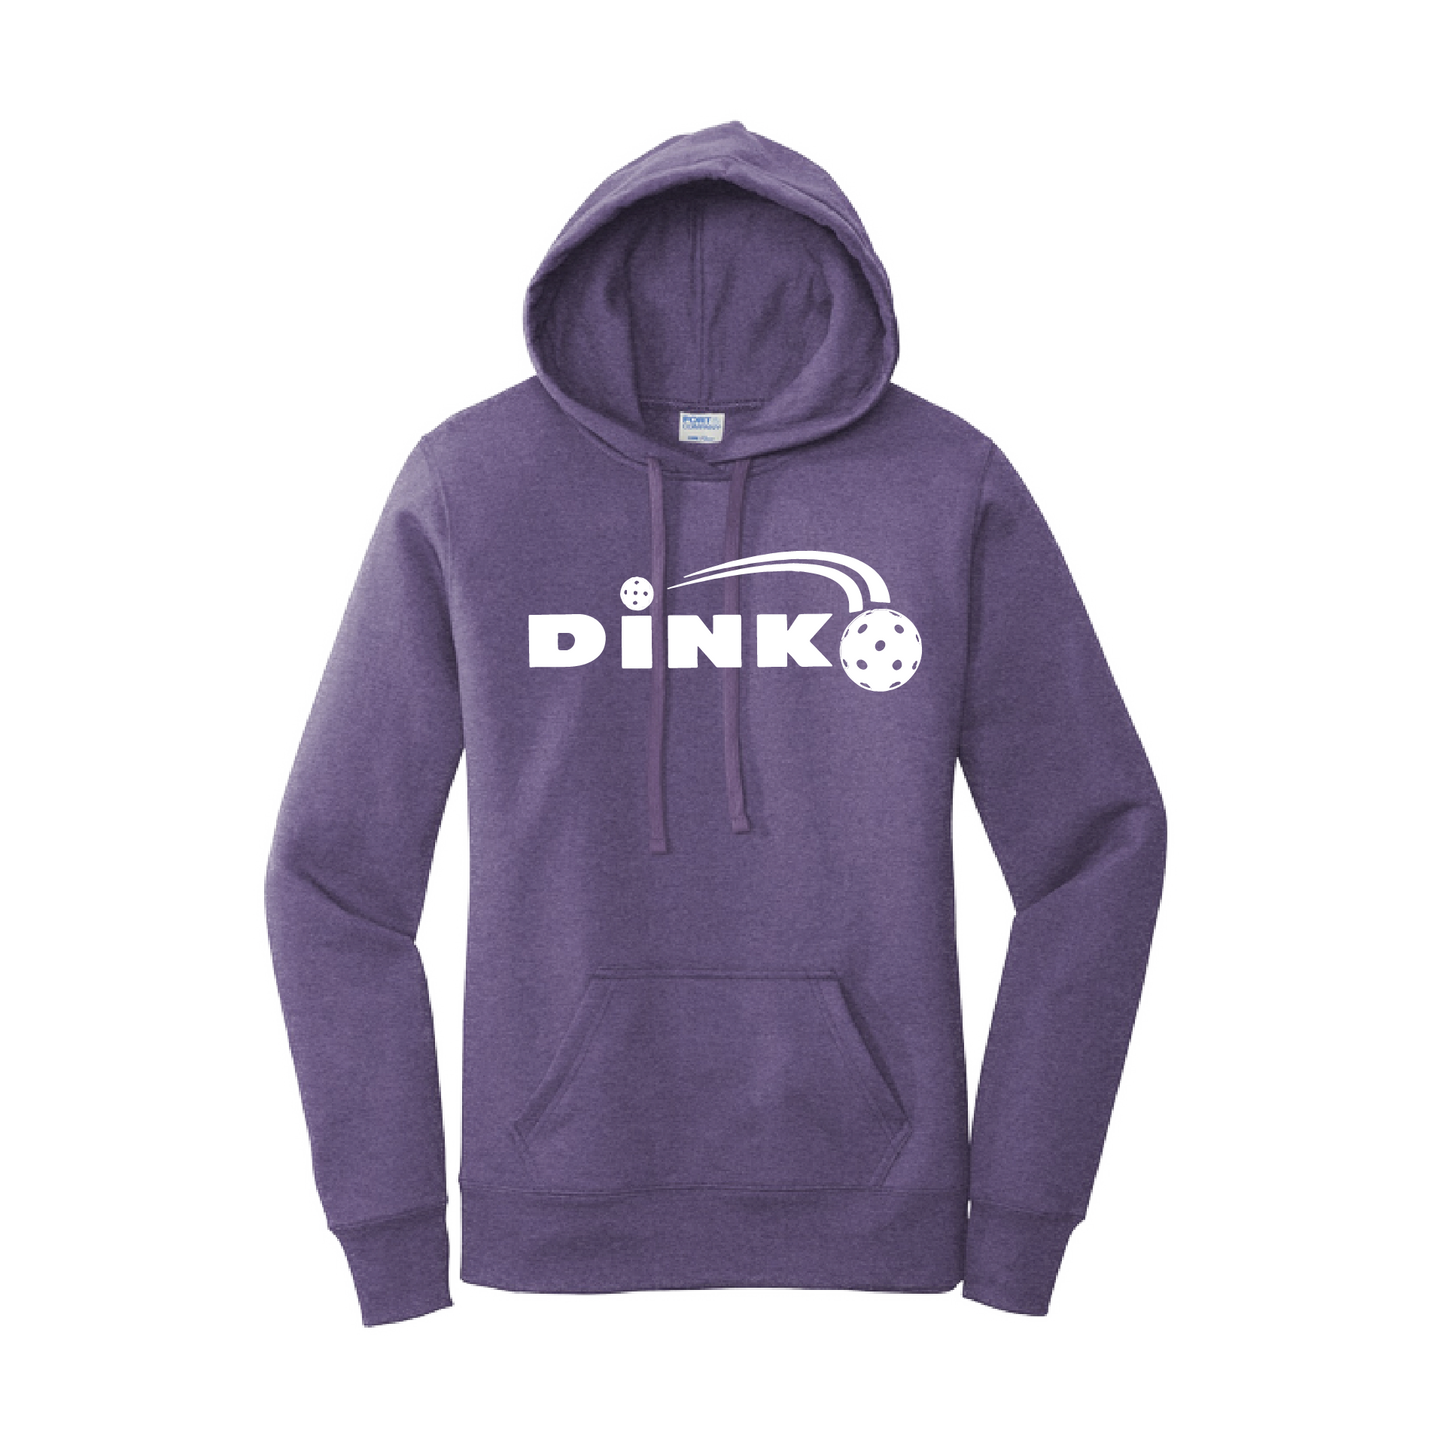 Pickleball Design: Dink  Women's Hooded Pullover Sweatshirt  Turn up the volume in this Women's Sweatshirts with its perfect mix of softness and attitude. Ultra soft lined inside with a lined hood also. This is fitted nicely for a women's figure. Front pouch pocket.